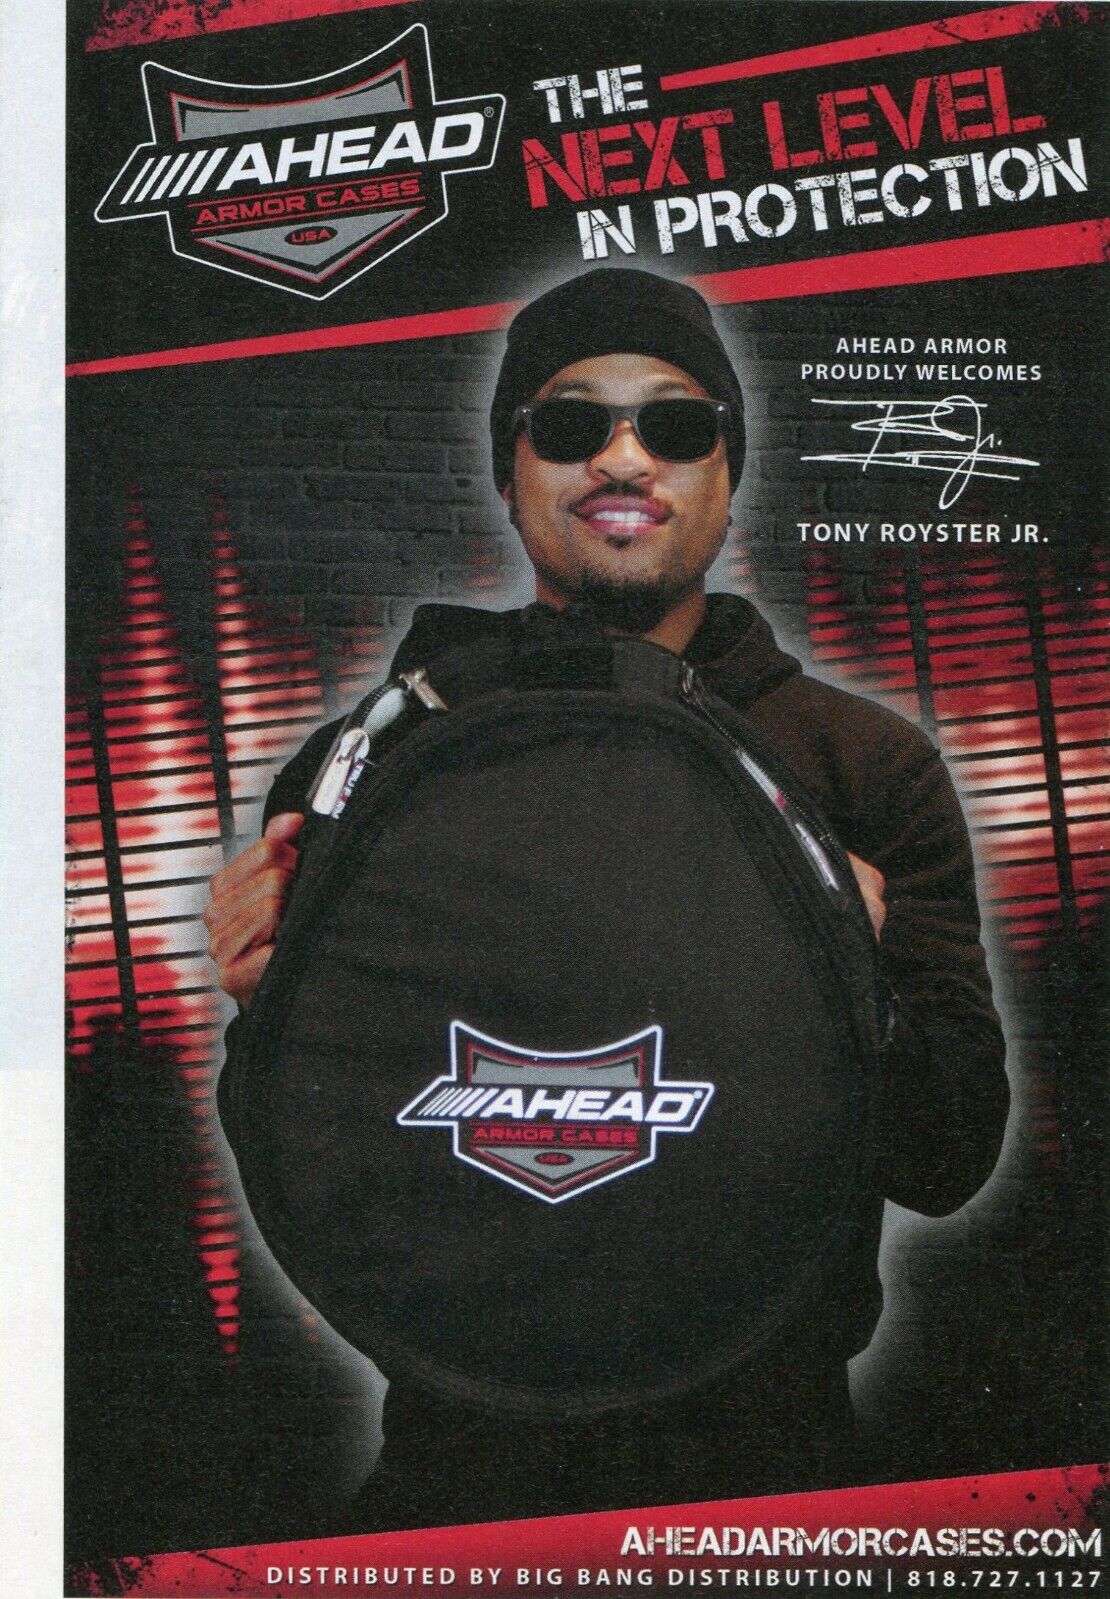 2015 small Print Ad of Ahead Armor Drum Cases w Tony Royster Jr